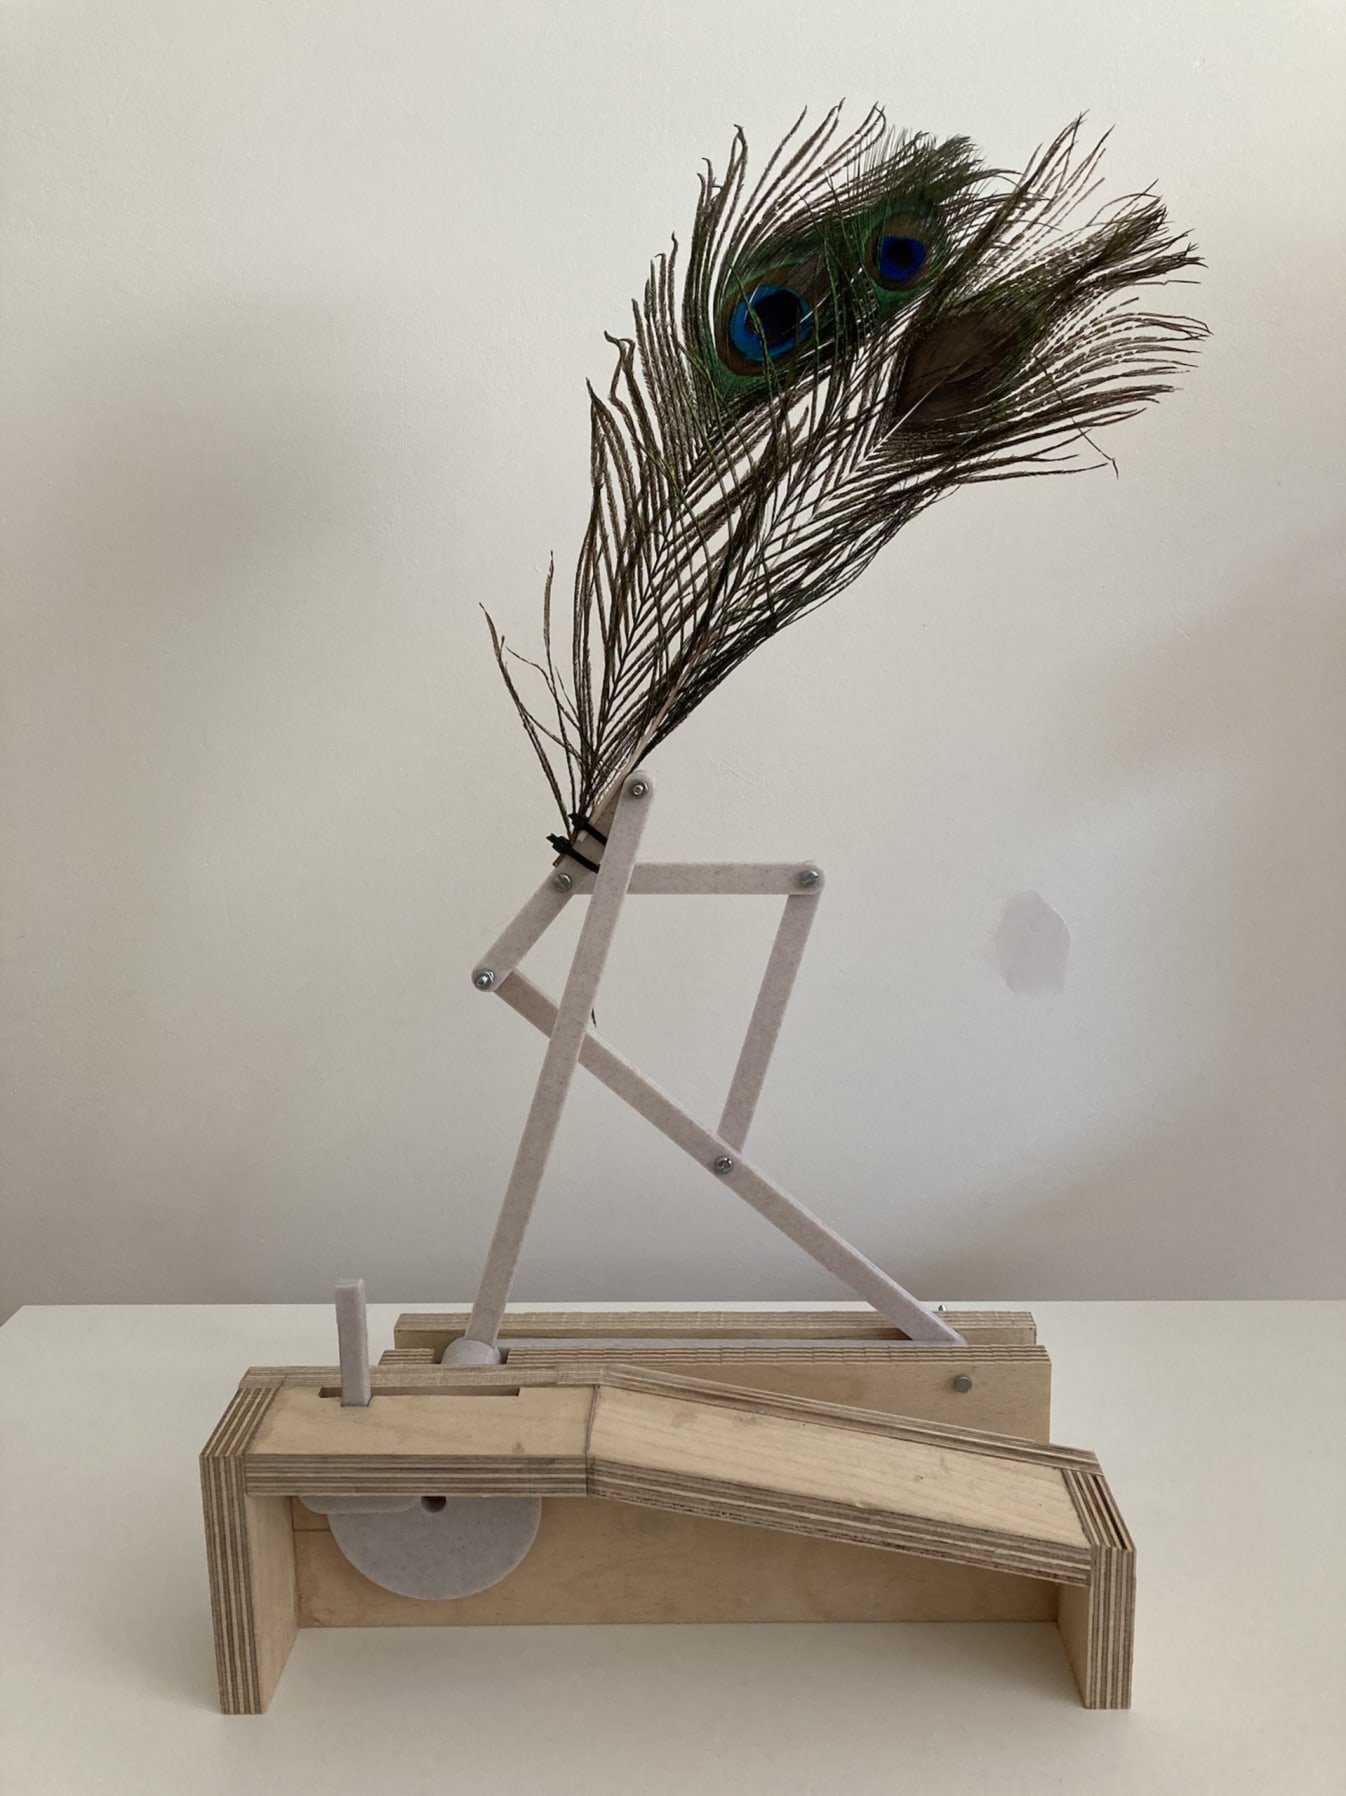 A mechanical linkage allows players to raise a peacock feather on activating a bell - signalling who is making what sound when